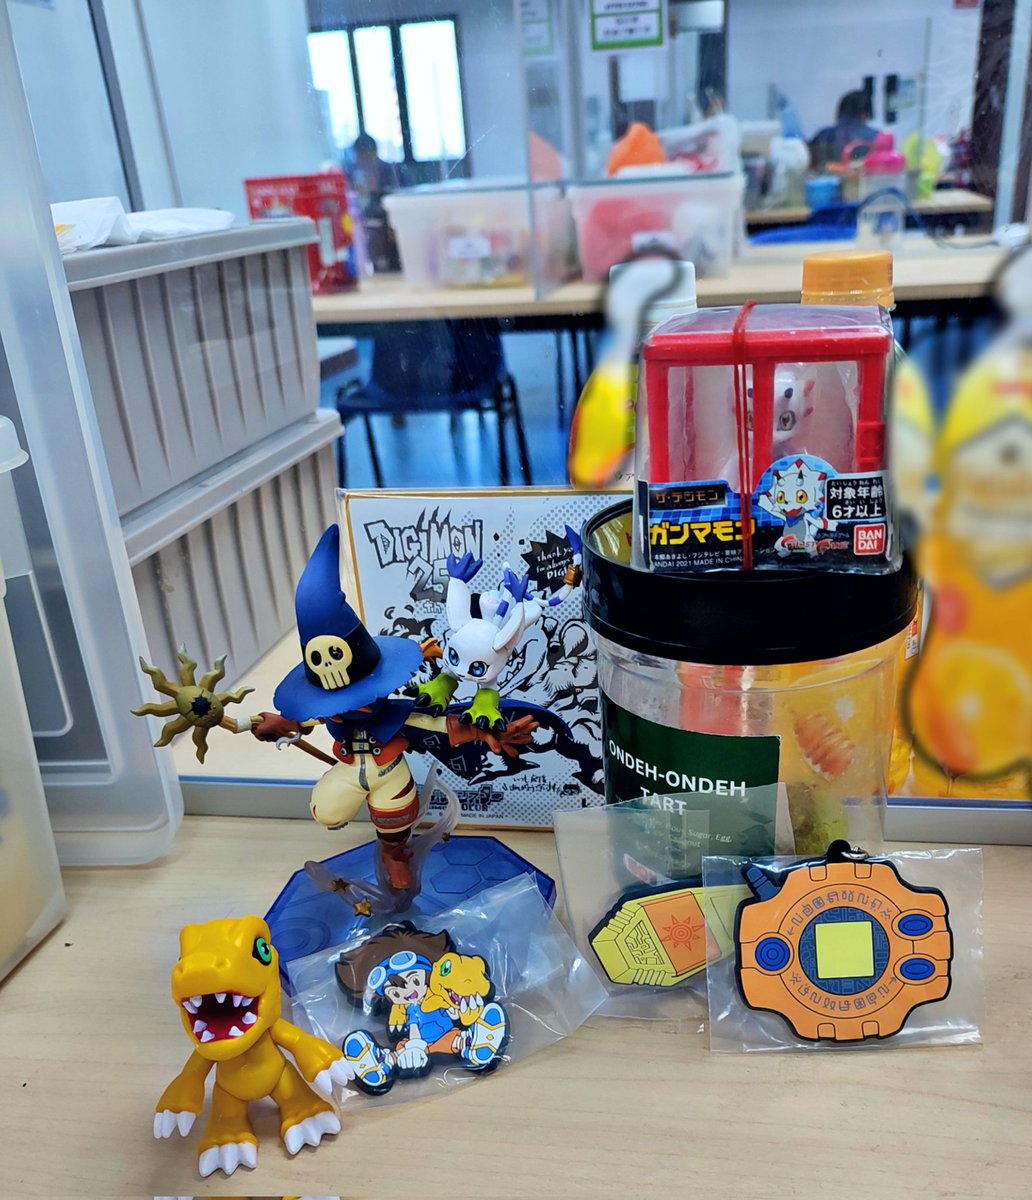 Currently at my workplace table

#DIGIMON #DigitalMonsters
#DigiDestined